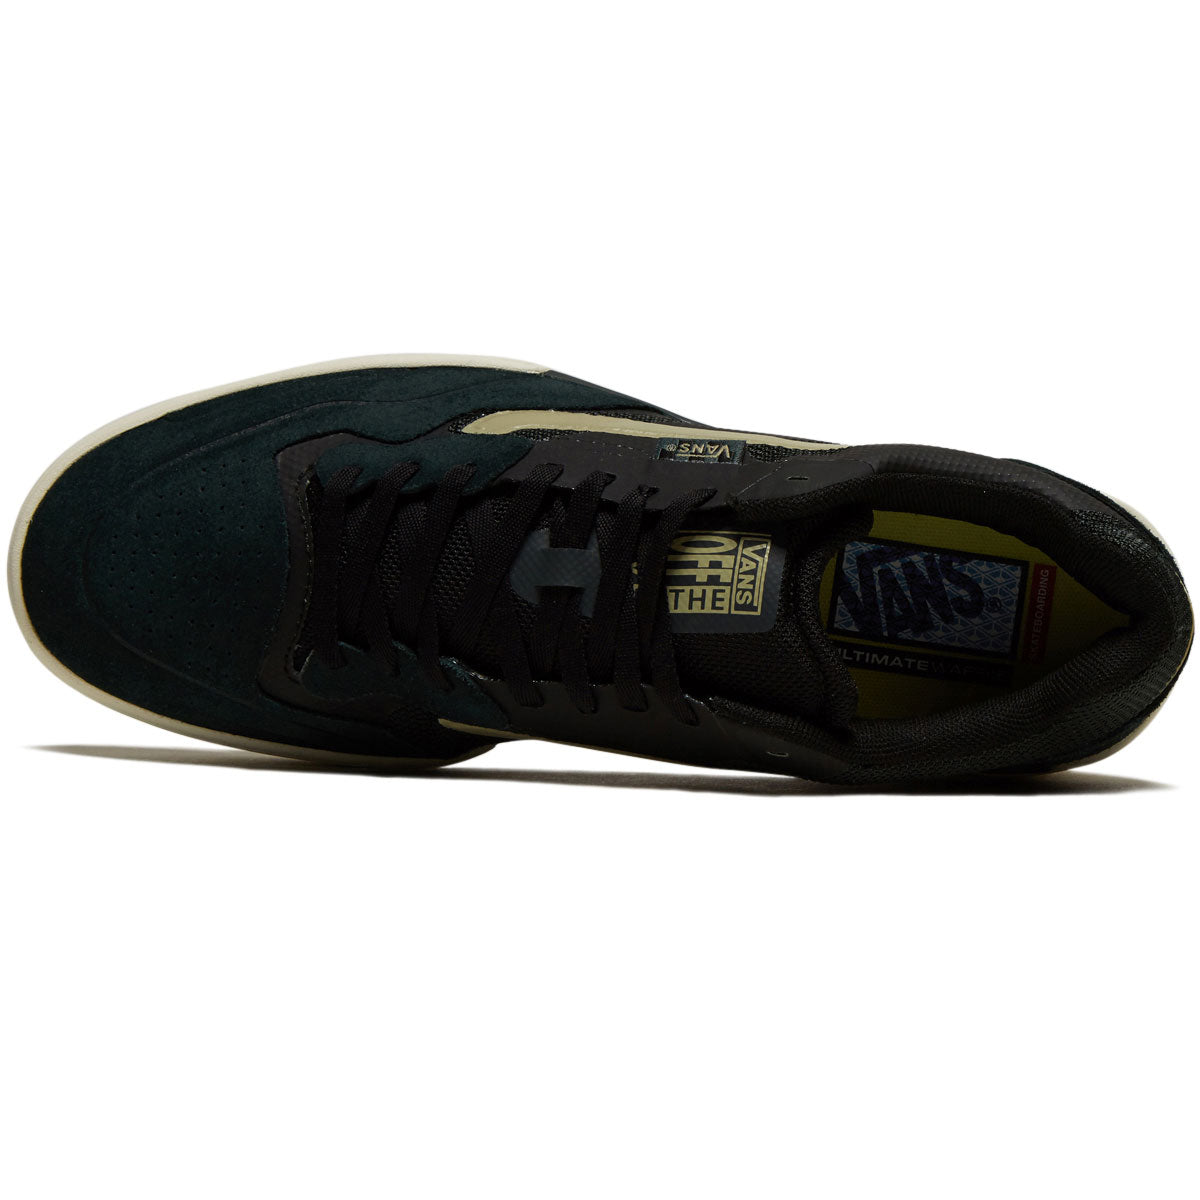 Vans AVE 2.0 Shoes - AVE Bench Green image 3